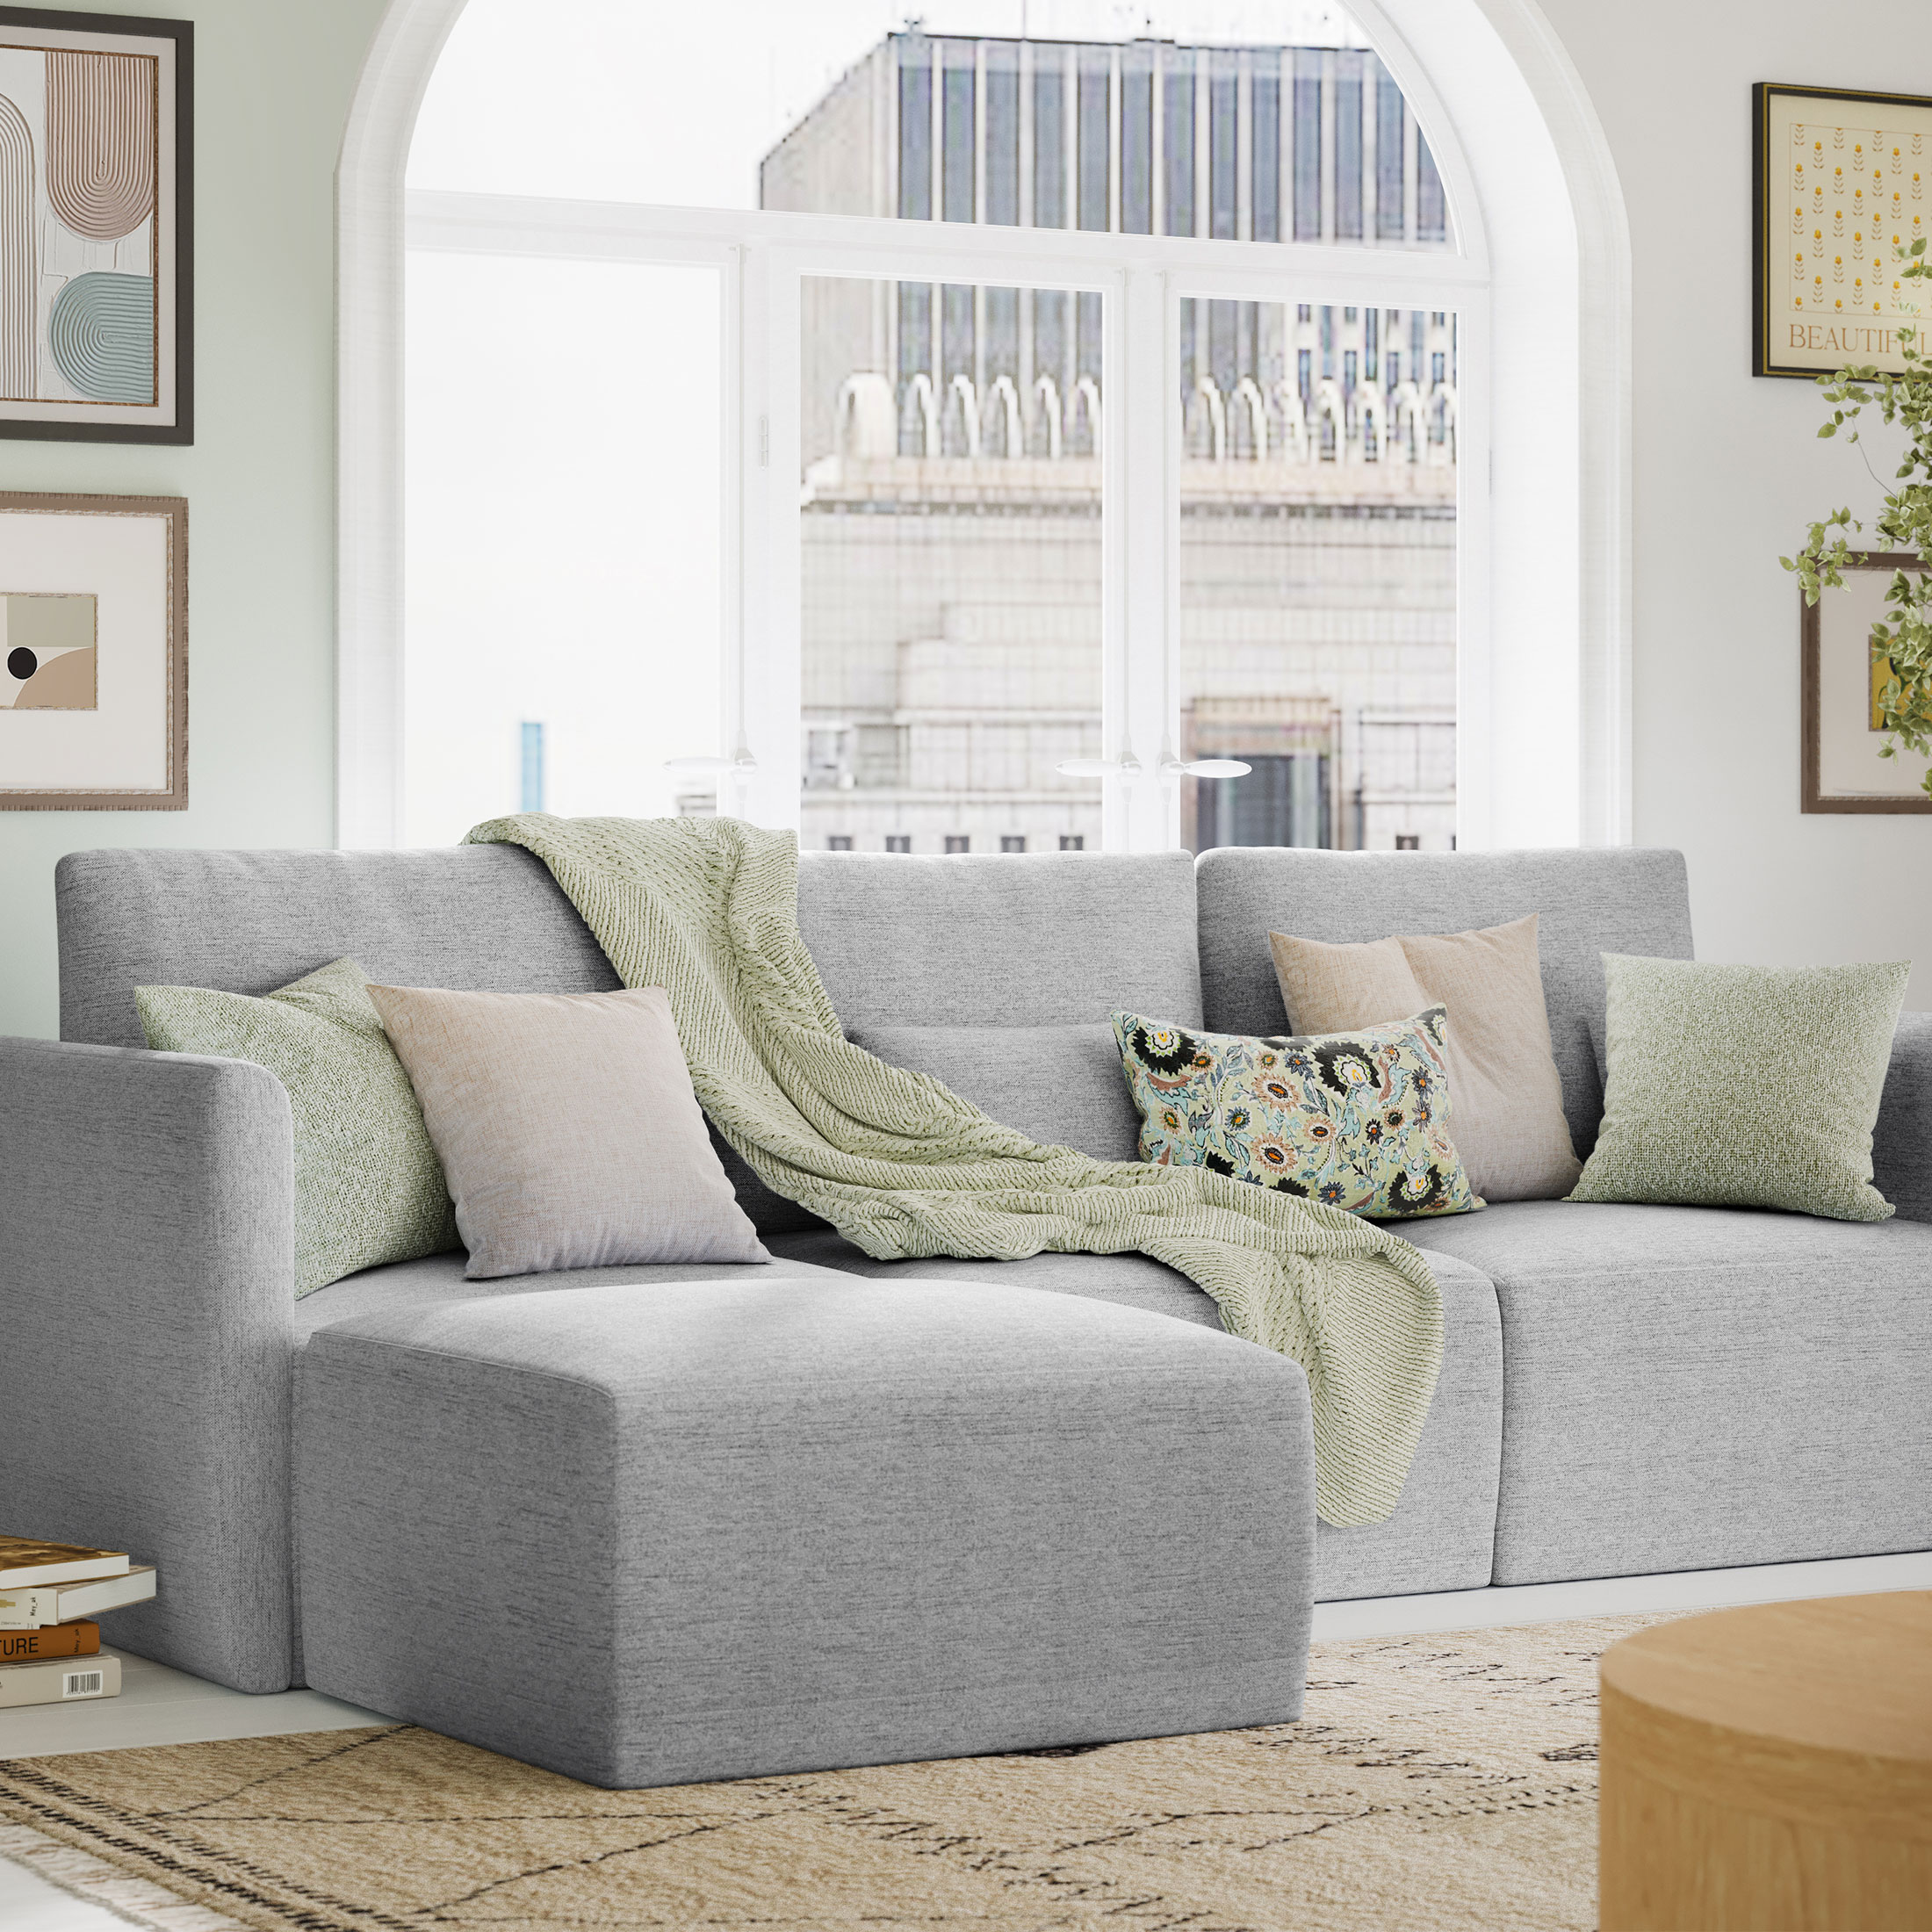 Beautiful Drew Modular Sectional Sofa with Ottoman by Drew Barrymore, Gray Fabric - image 1 of 15